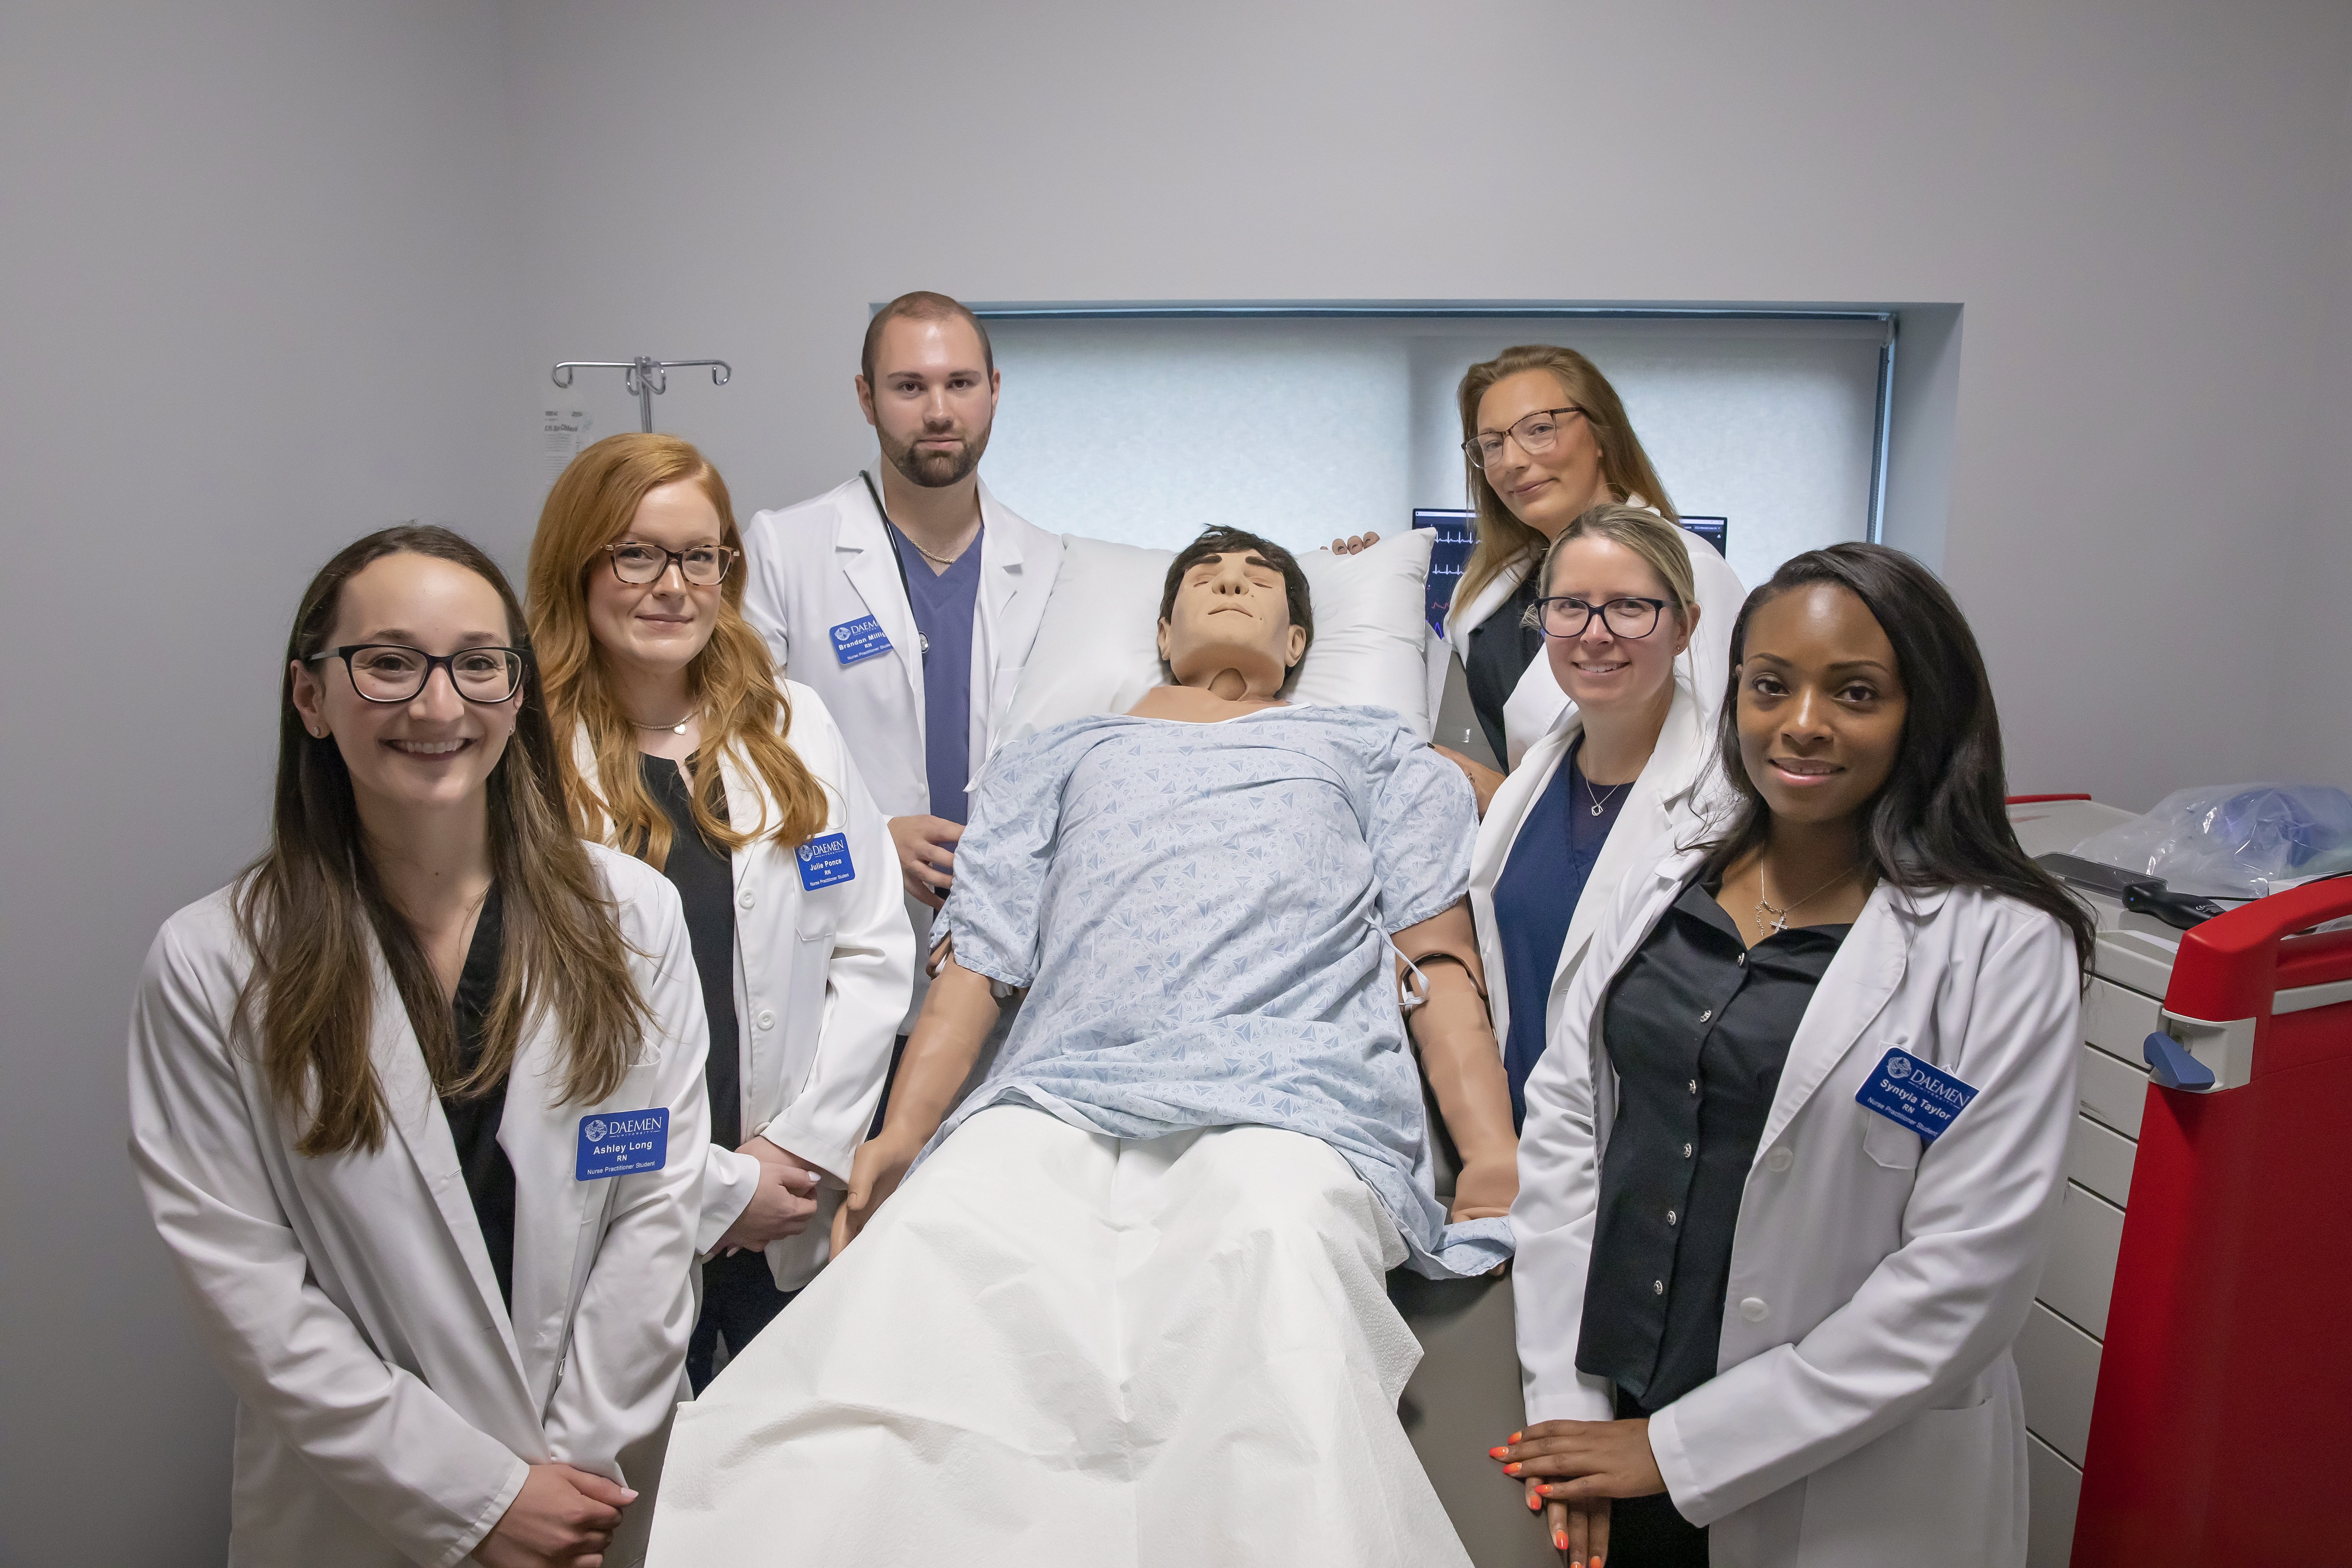 Faculty and students posing with a new high-fidelity manikin in the CILS